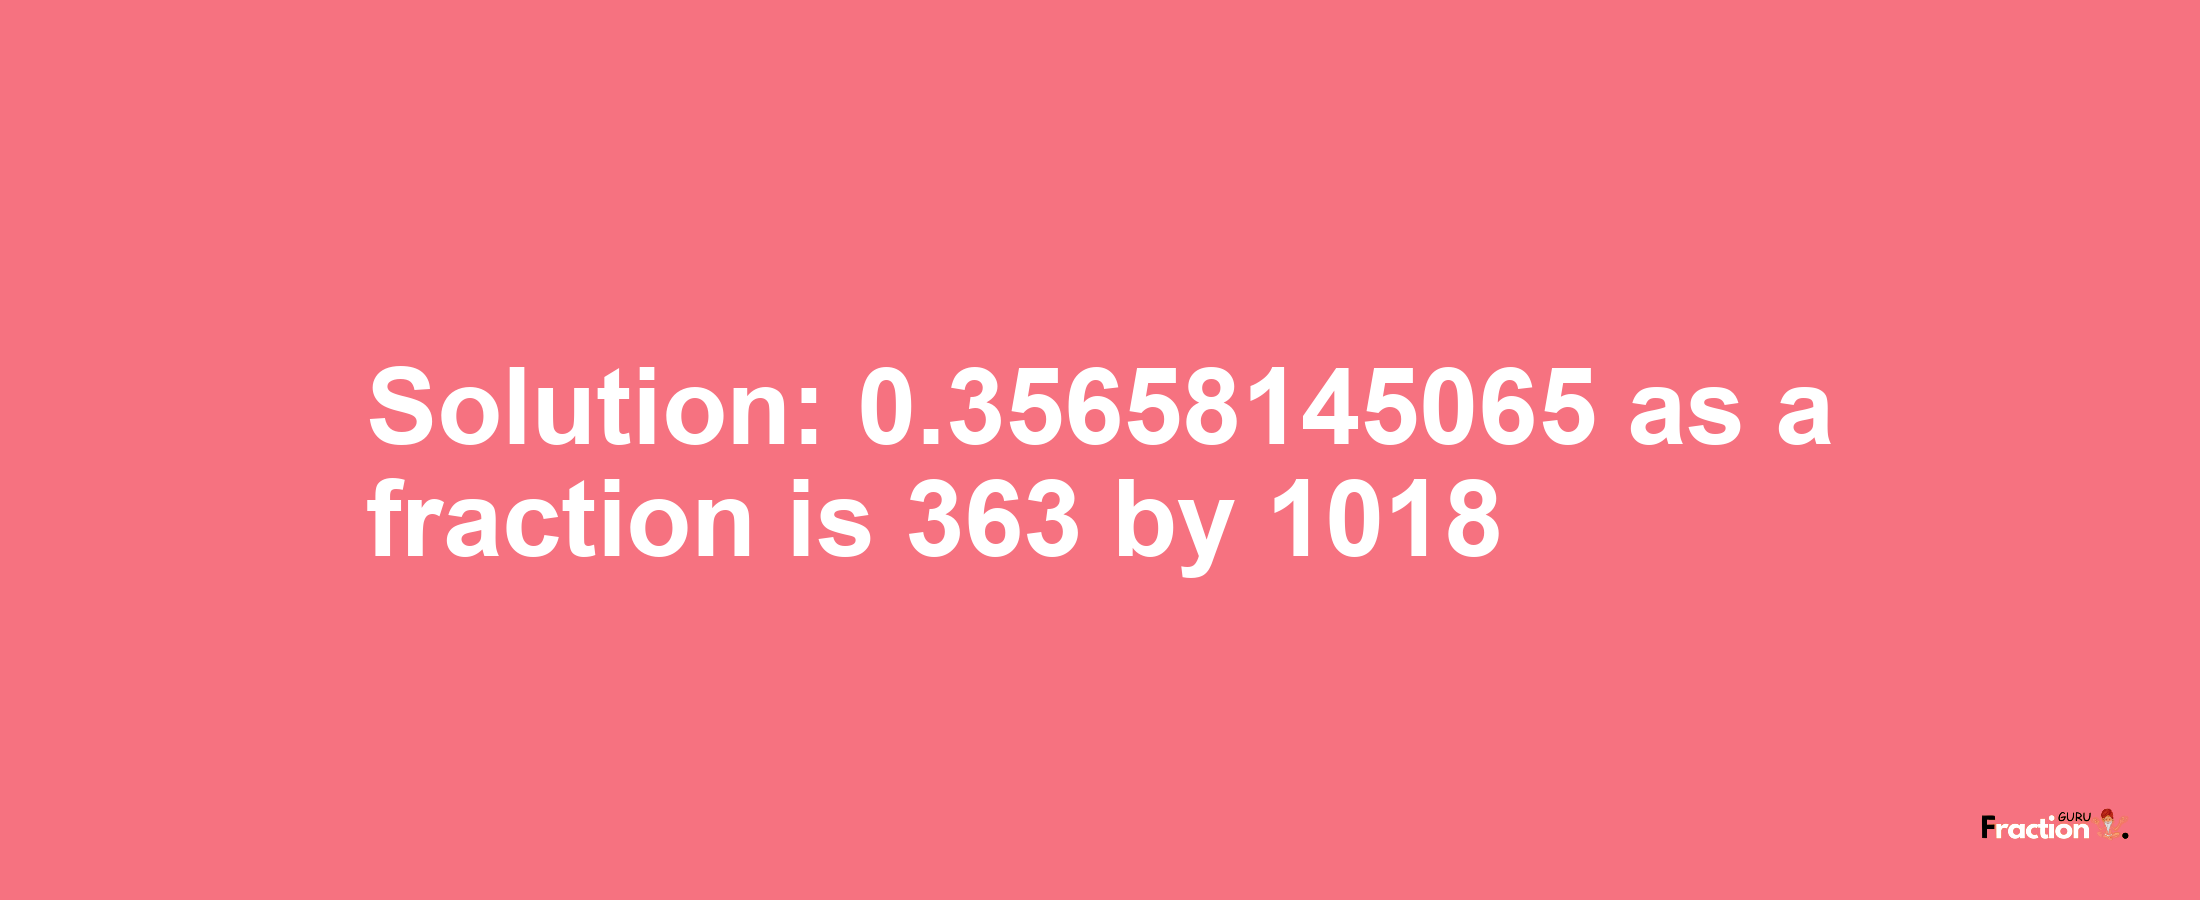 Solution:0.35658145065 as a fraction is 363/1018